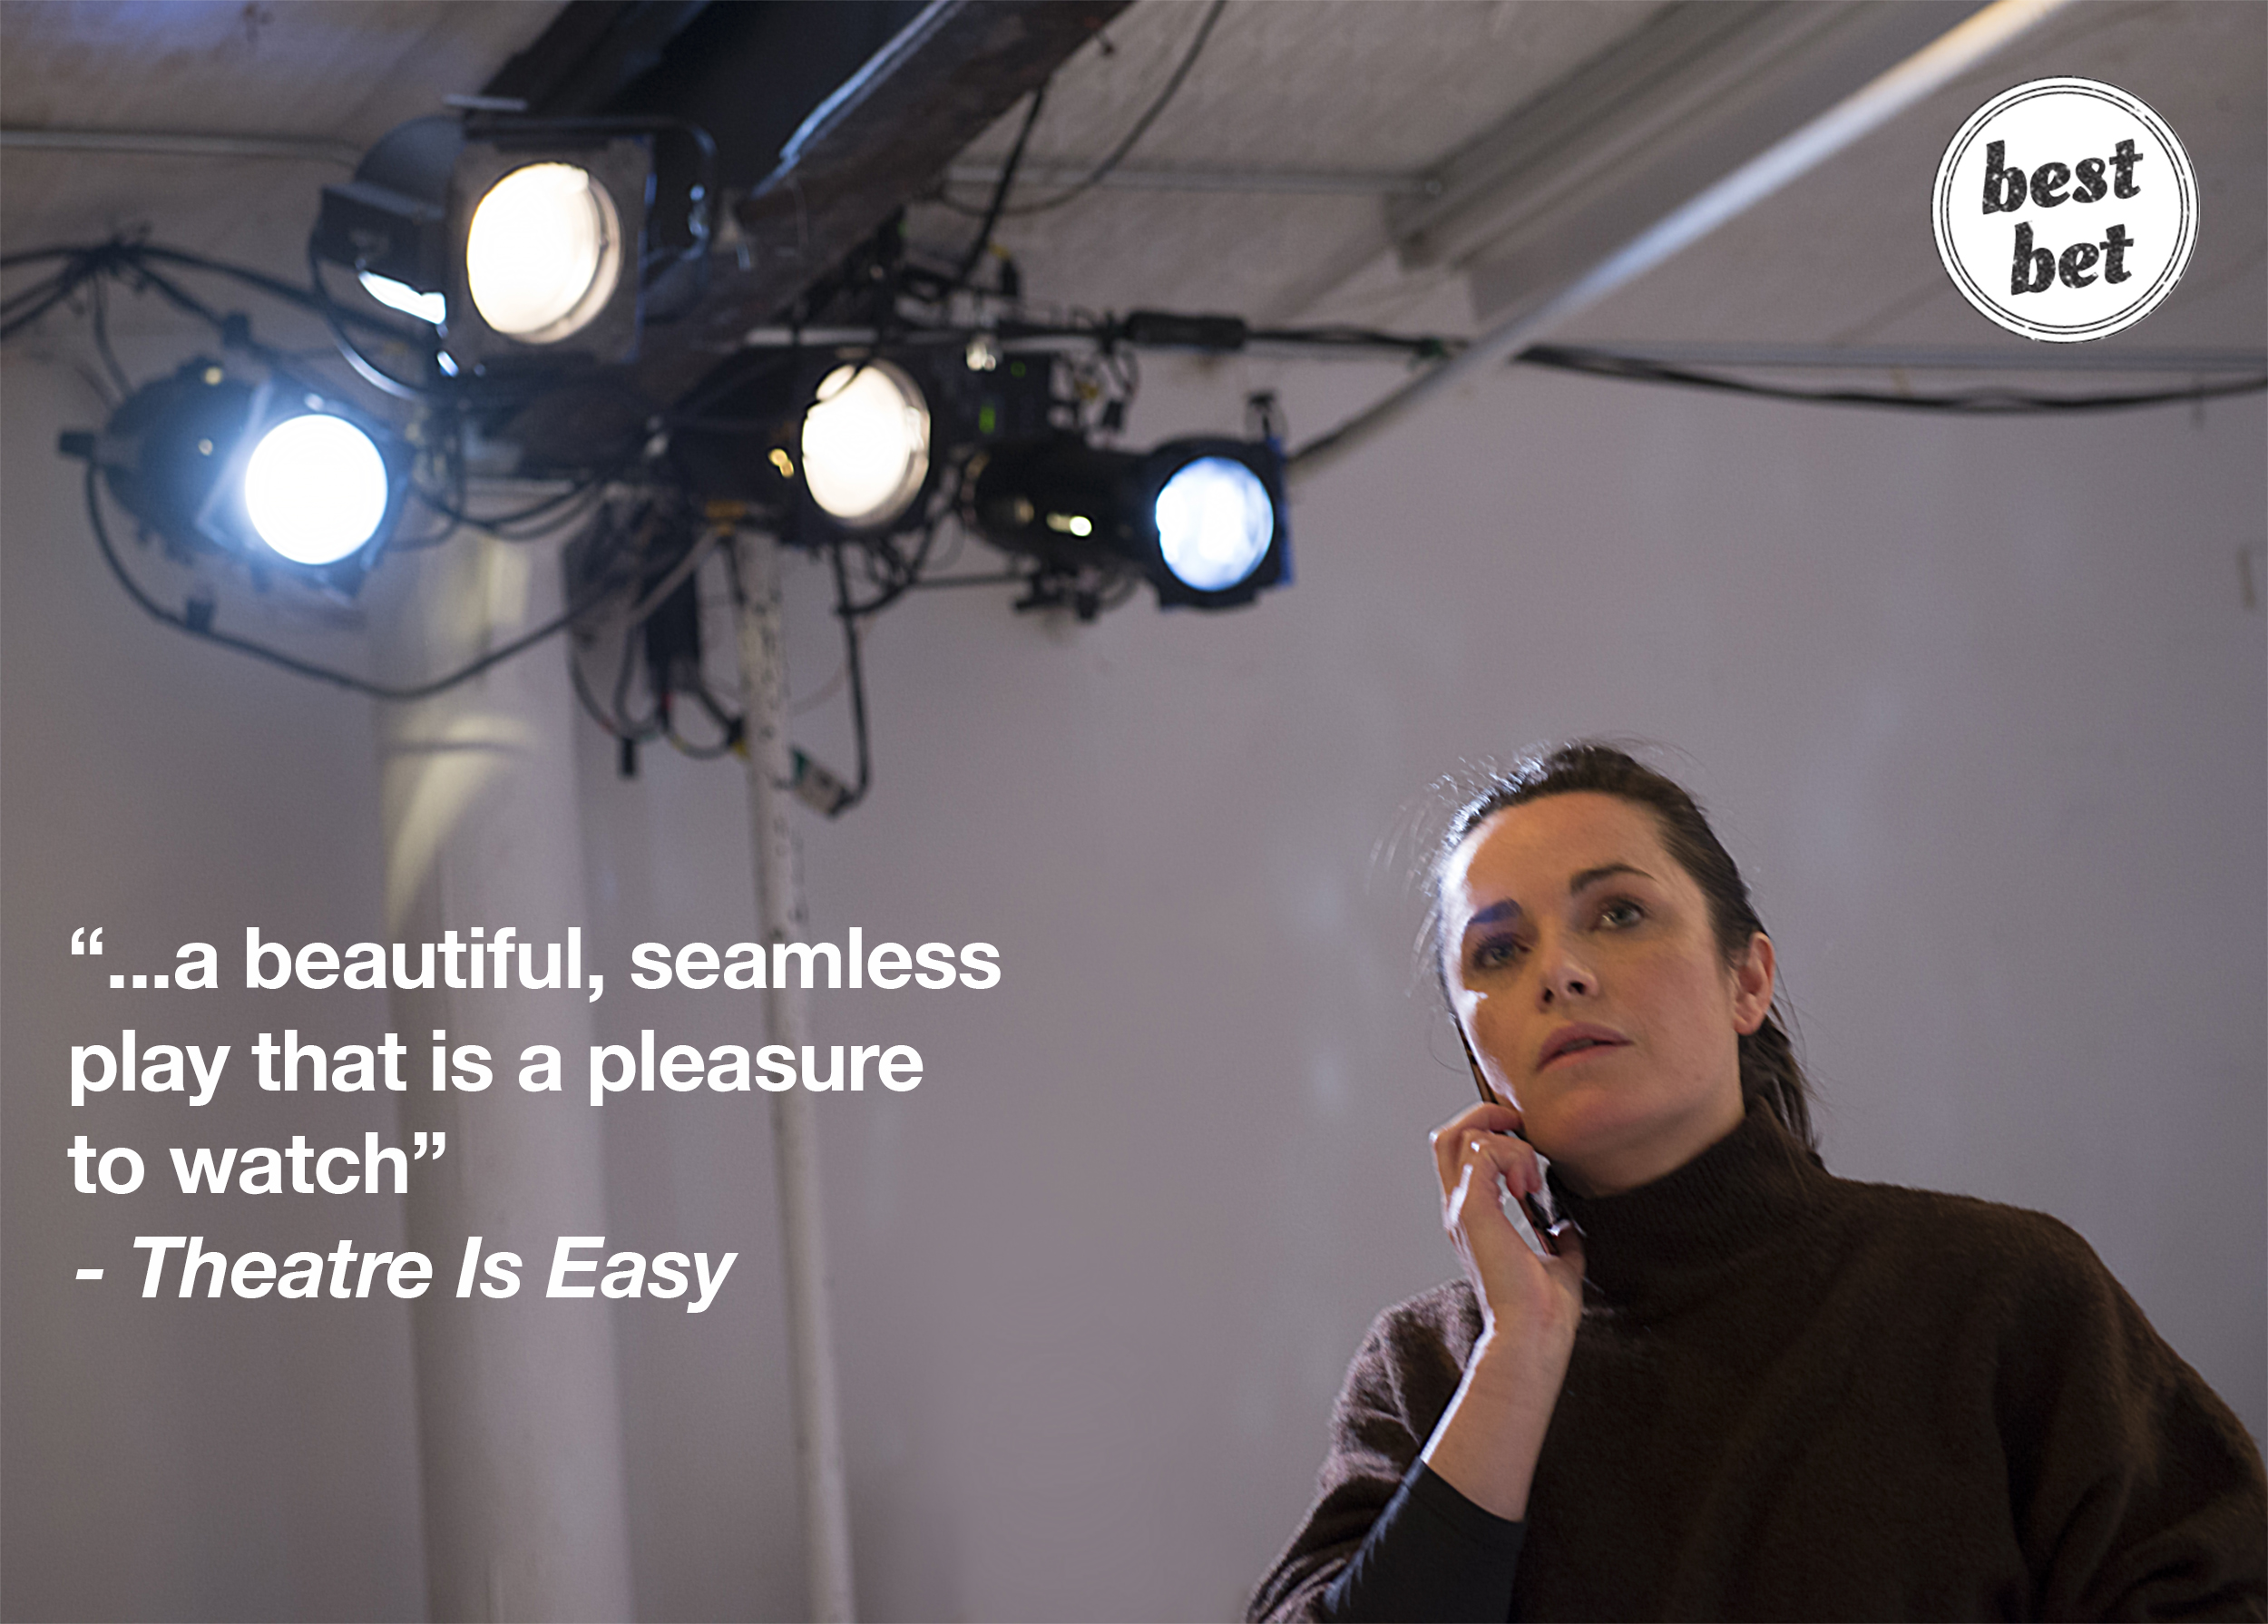  Stephanie Heitman as "Kelly" on the phone with “…a beautiful, seamless play that is a pleasure to watch” -  Theatre Is Easy  